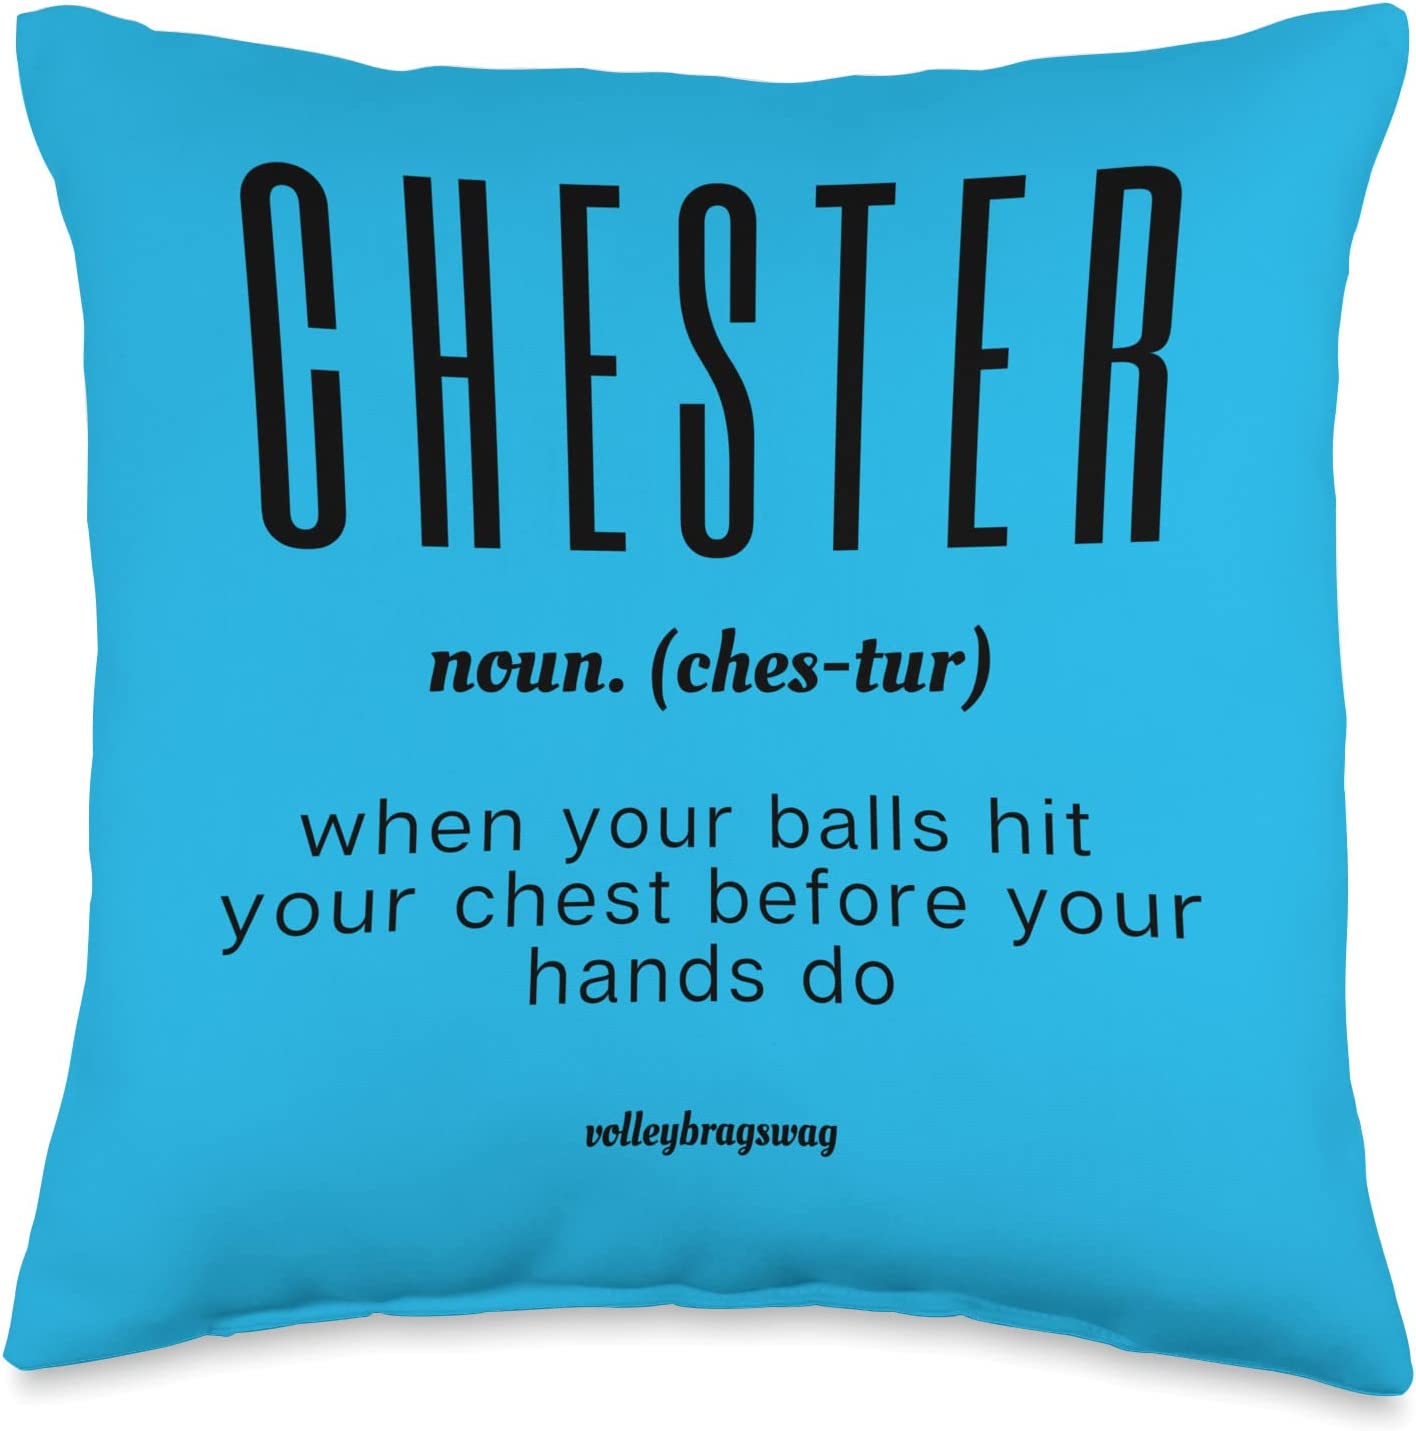 CHESTER (noun) When Your Balls Hit Your Chest Before Your Hands Do volleyball shirt. April Chapple, Launches a Hilarious Volleyball T-shirt Line With Fun Tongue-in-Cheek Designs sure to make players and enthusiasts laugh.